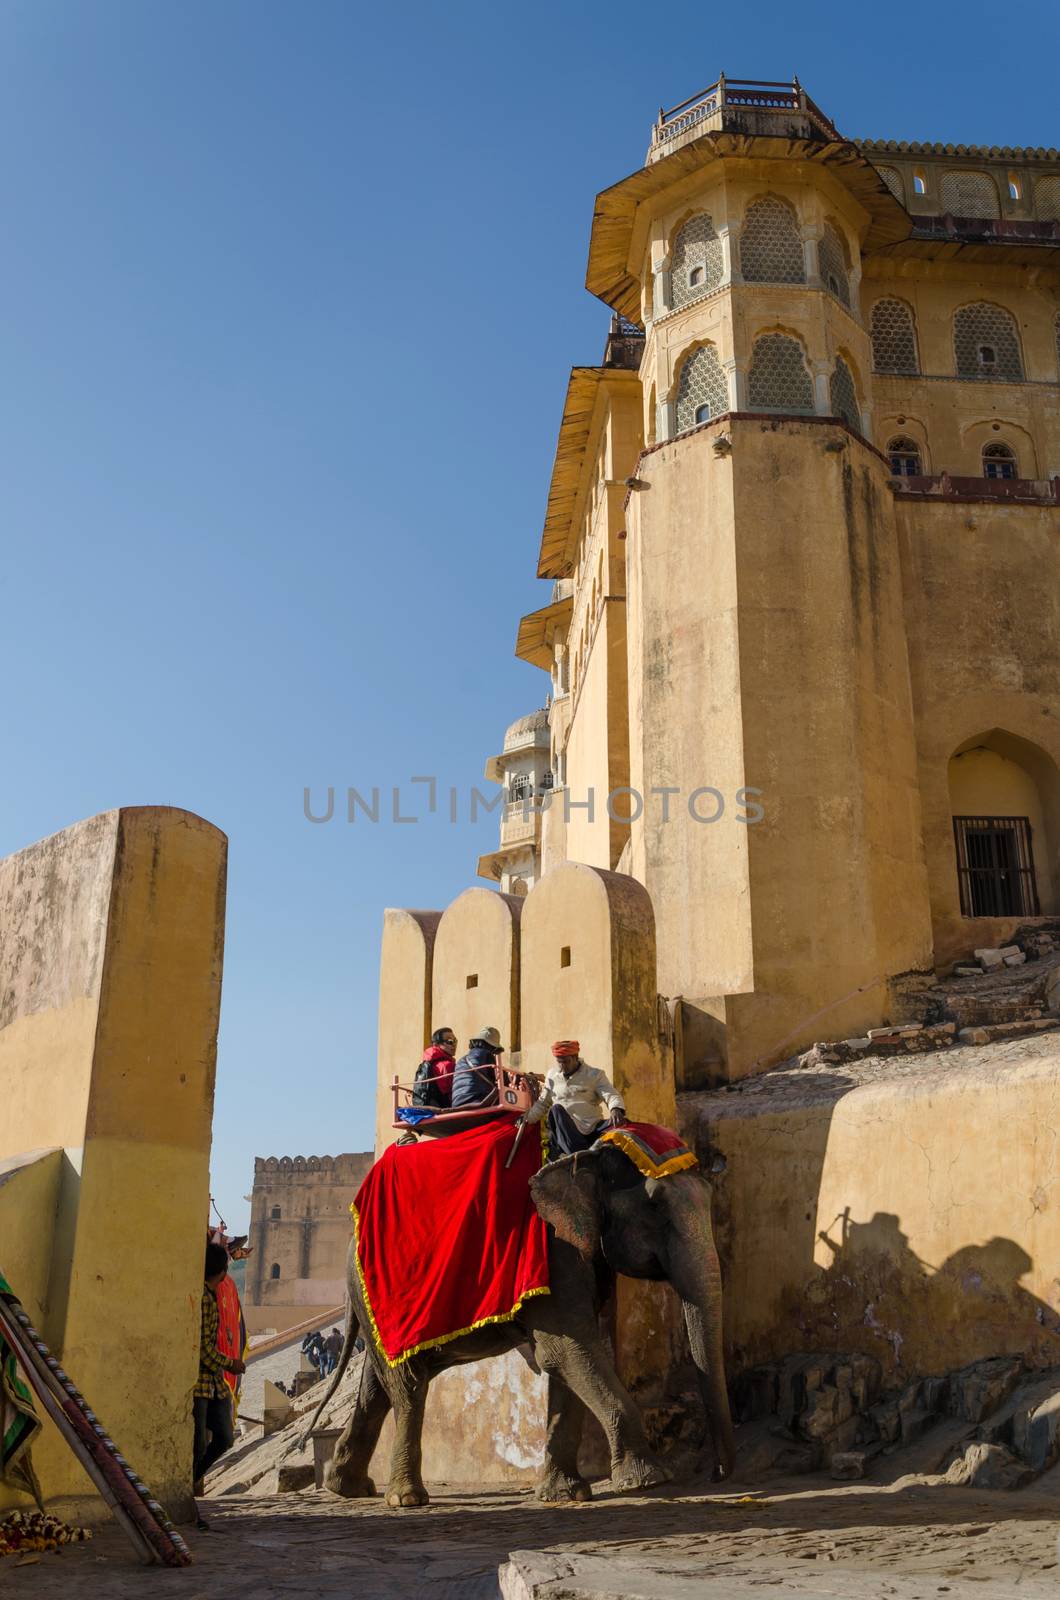 Jaipur, India - December 29, 2014: Decorated elephant carries to Amber Fort by siraanamwong